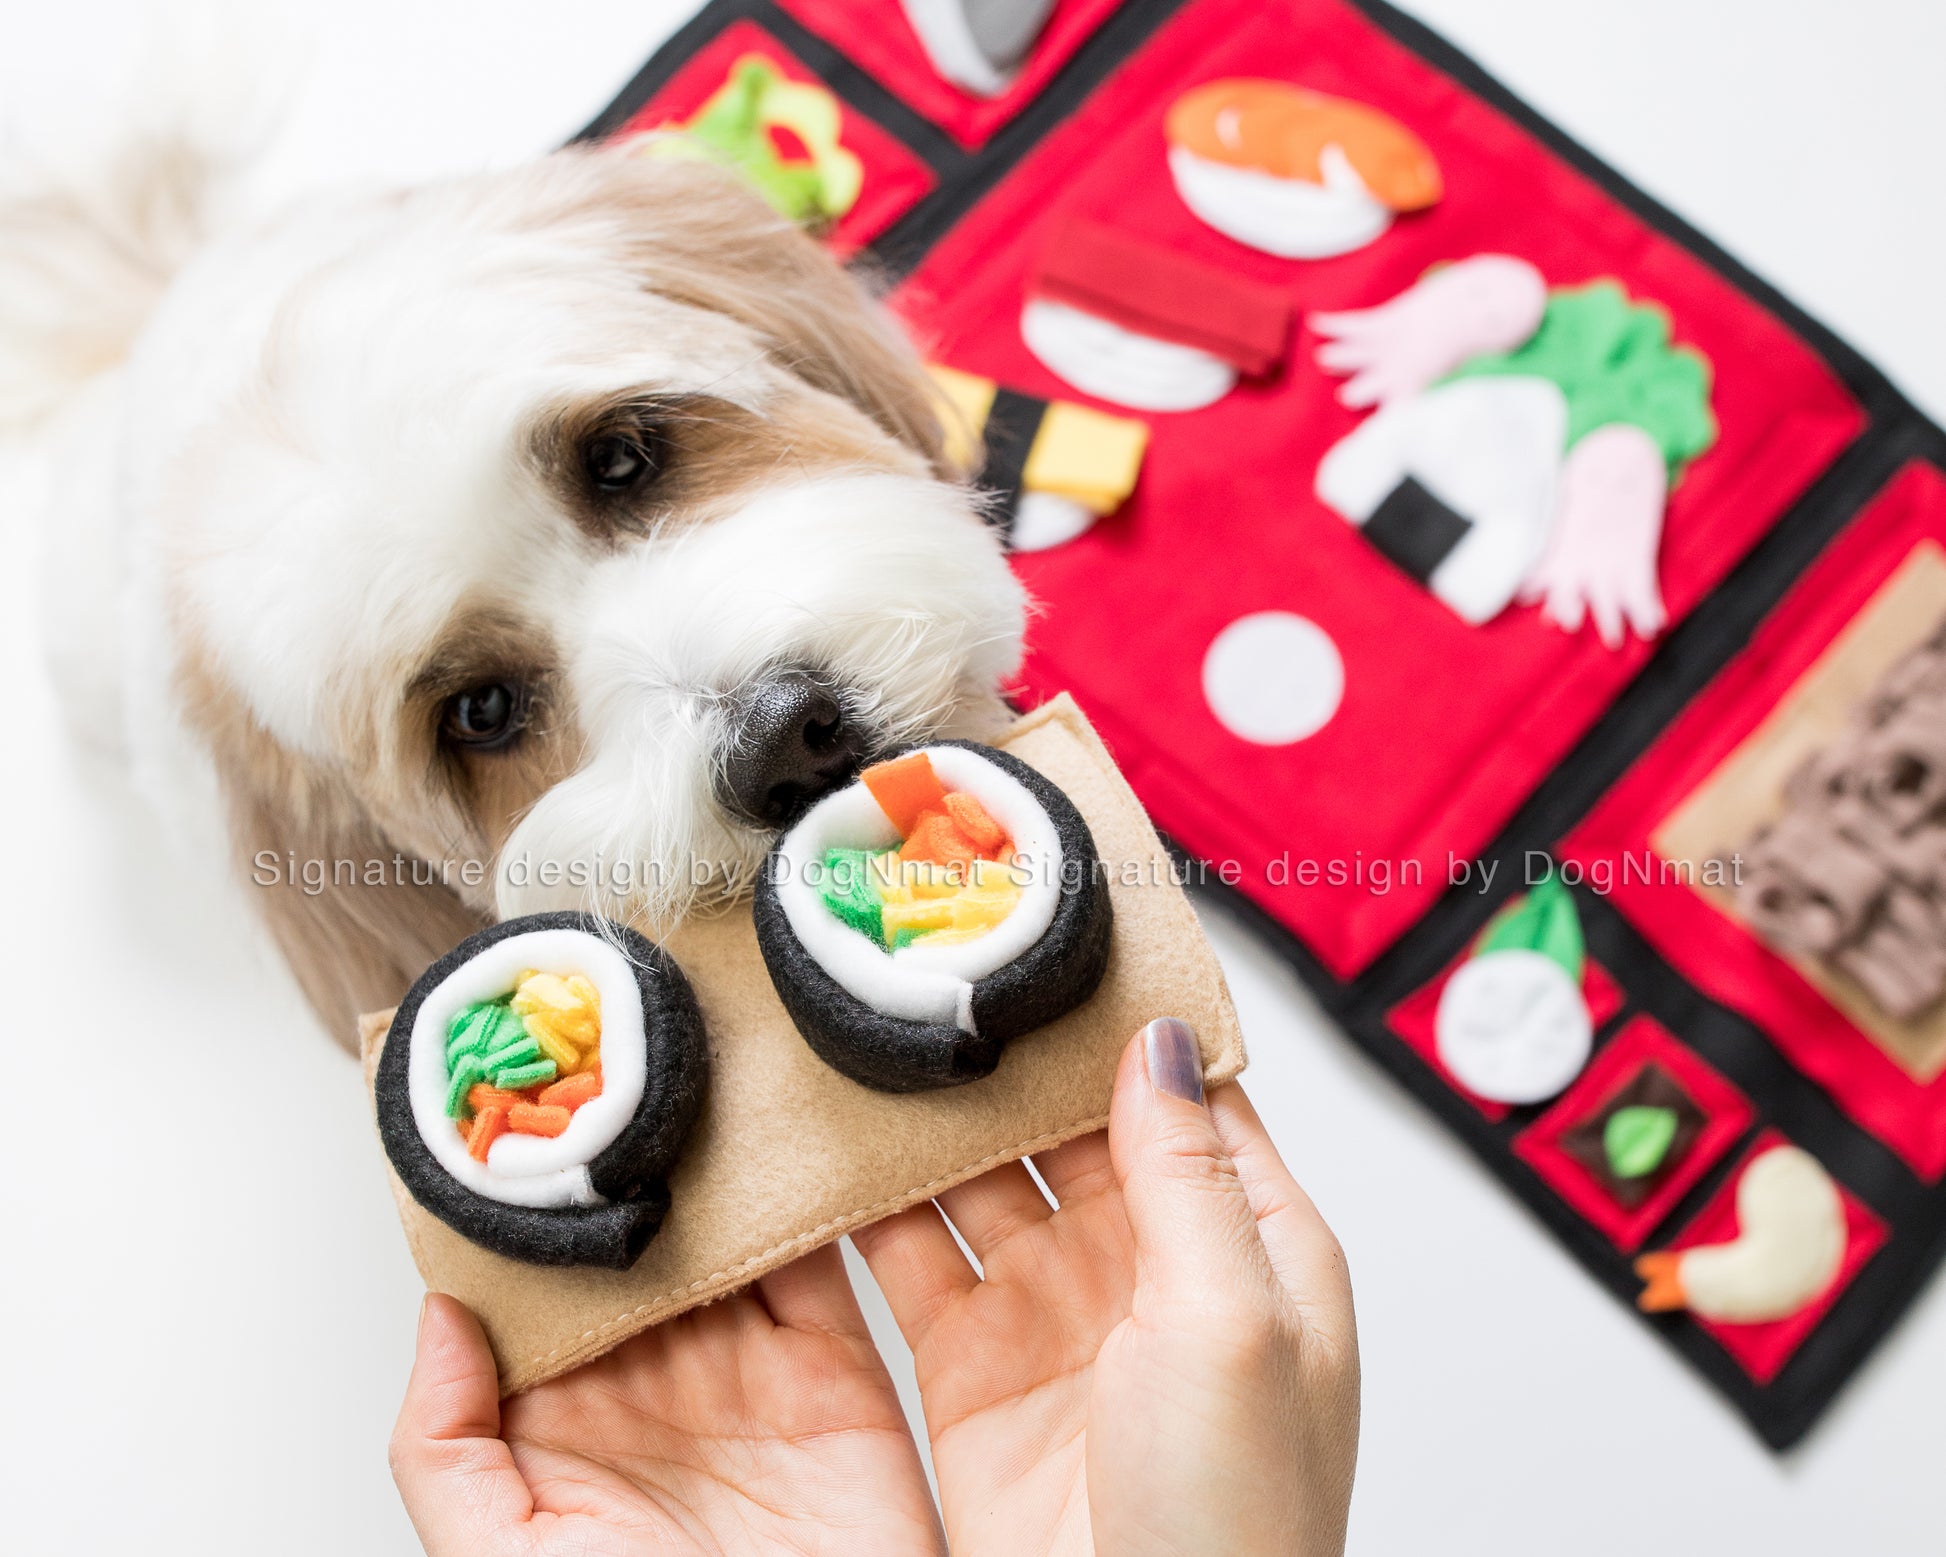 Sushi Roll Snuffle Mat Dog Toy by DogNmat – Store For The Dogs